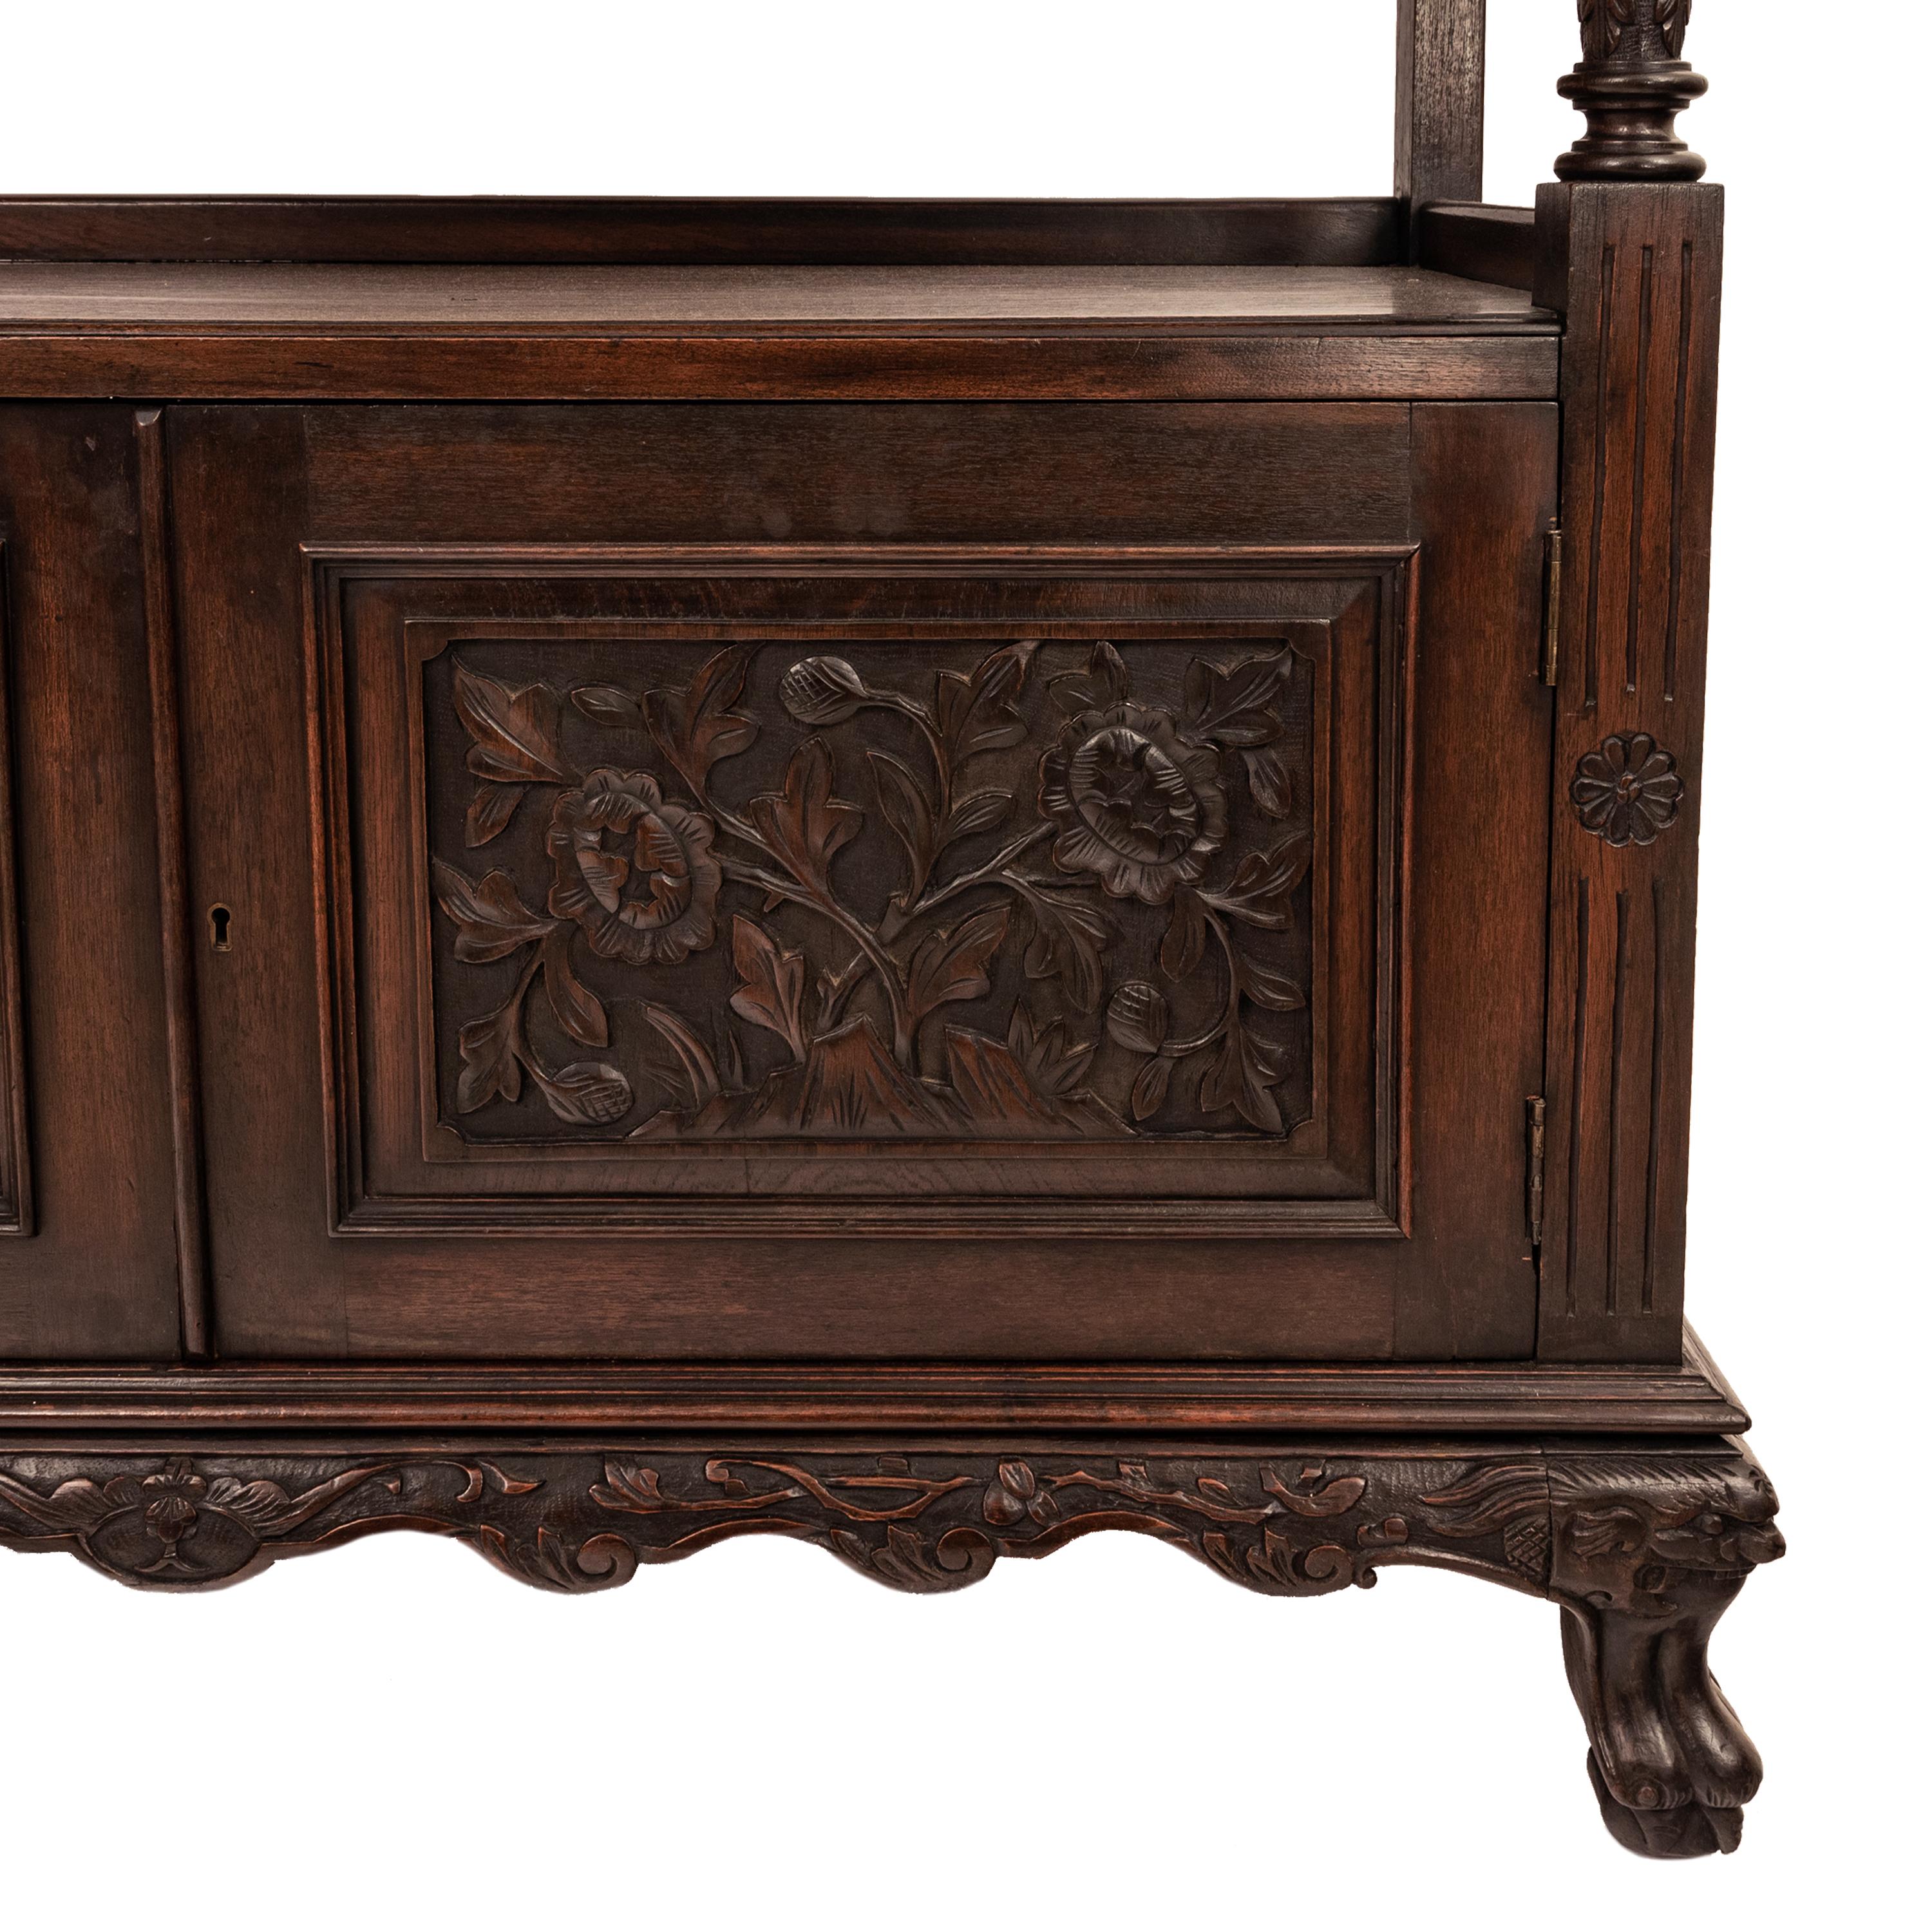 Antique French Carved Etagere Buffet Sideboard Chinoiserie Japanoise Style, 1875 For Sale 2